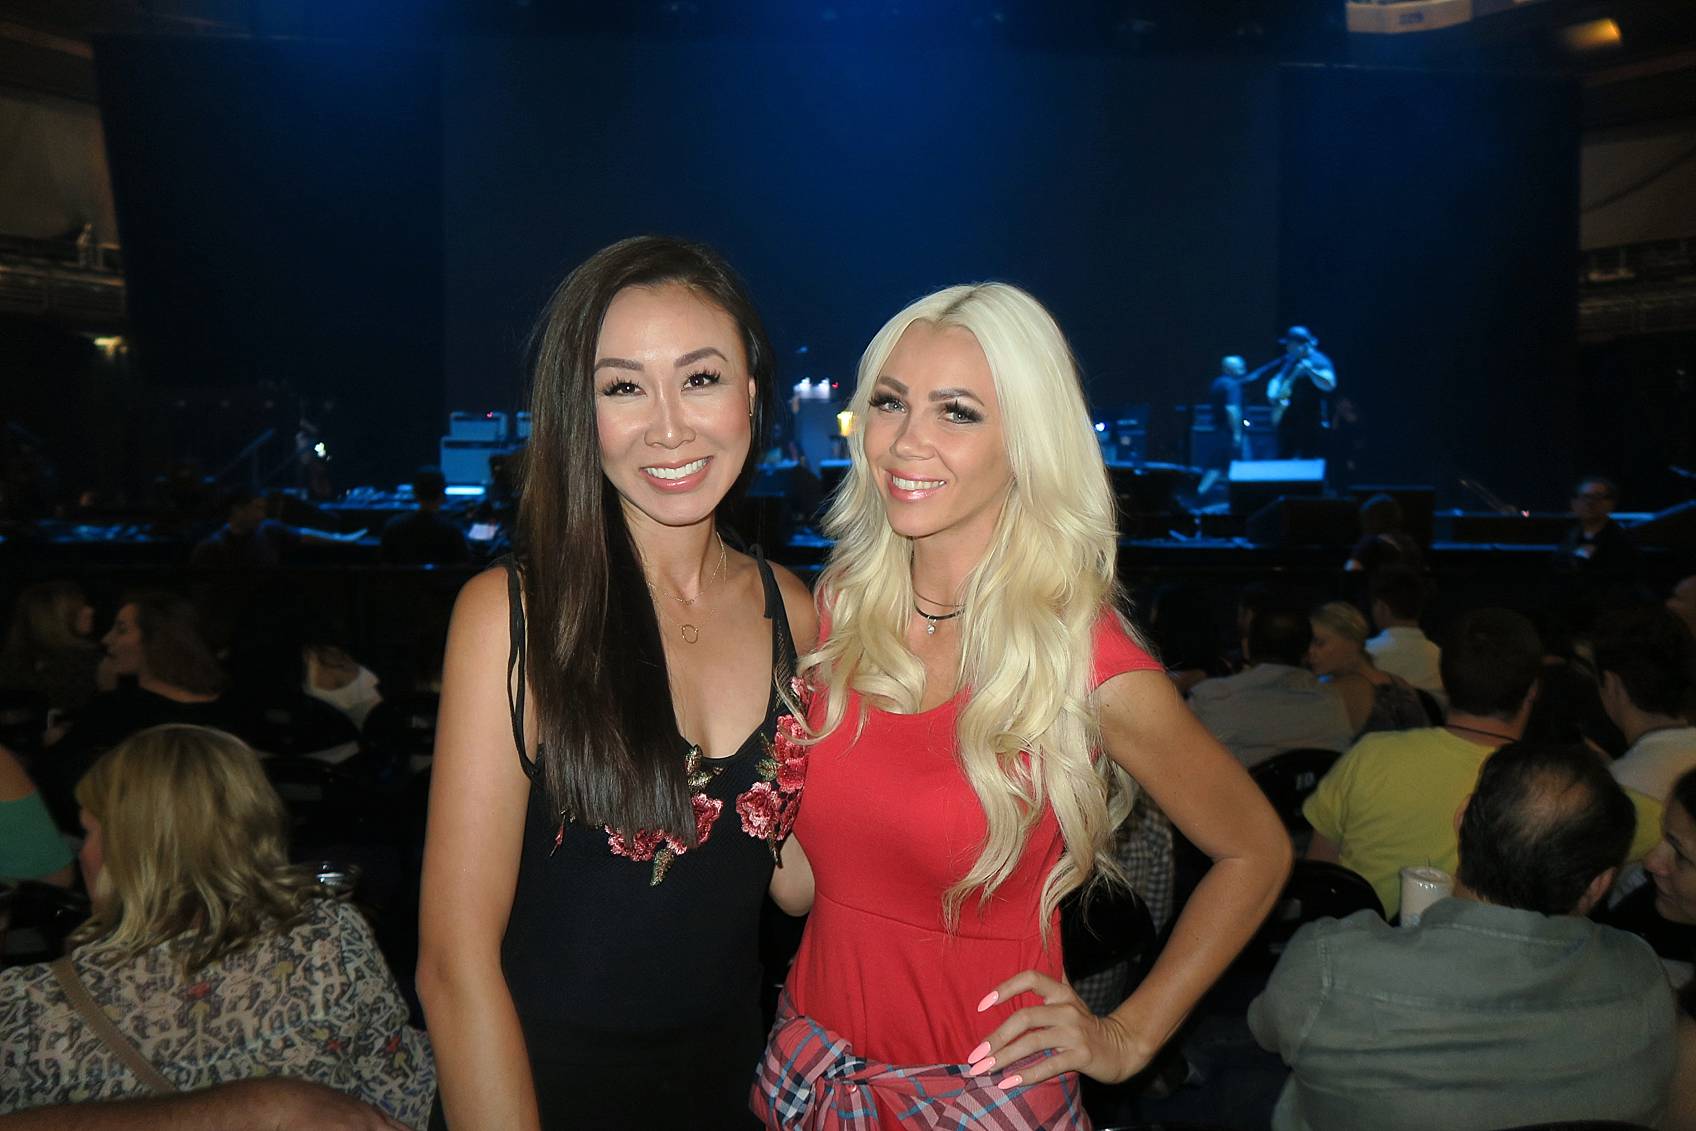 Diana Elizabeth blogger with friend in 5th row John Mayer concert to show how close seats are